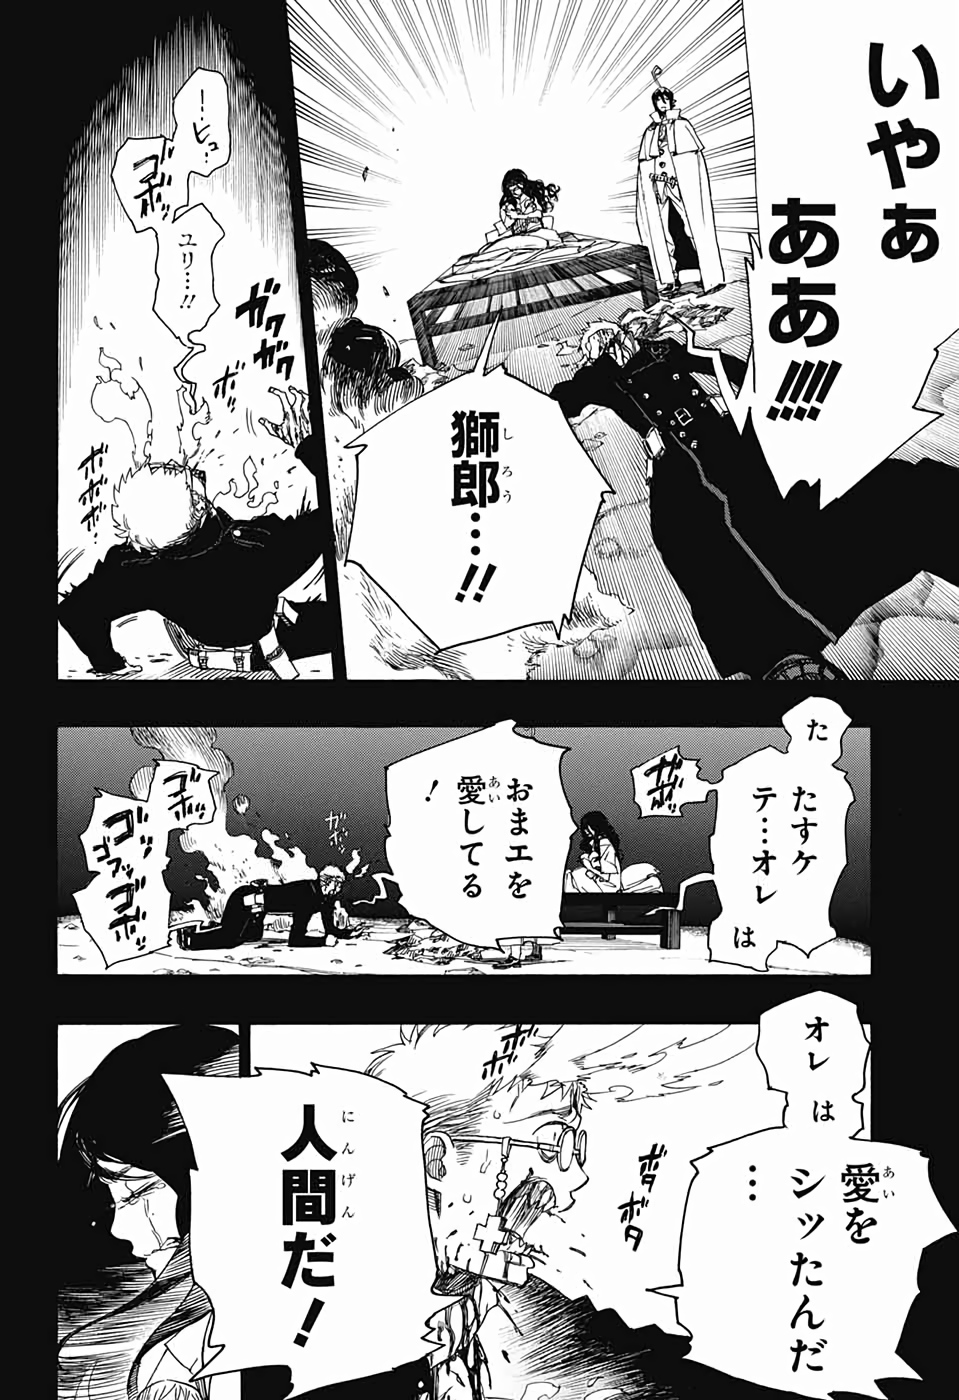 Ao no Exorcist - Chapter 117 - Page 2